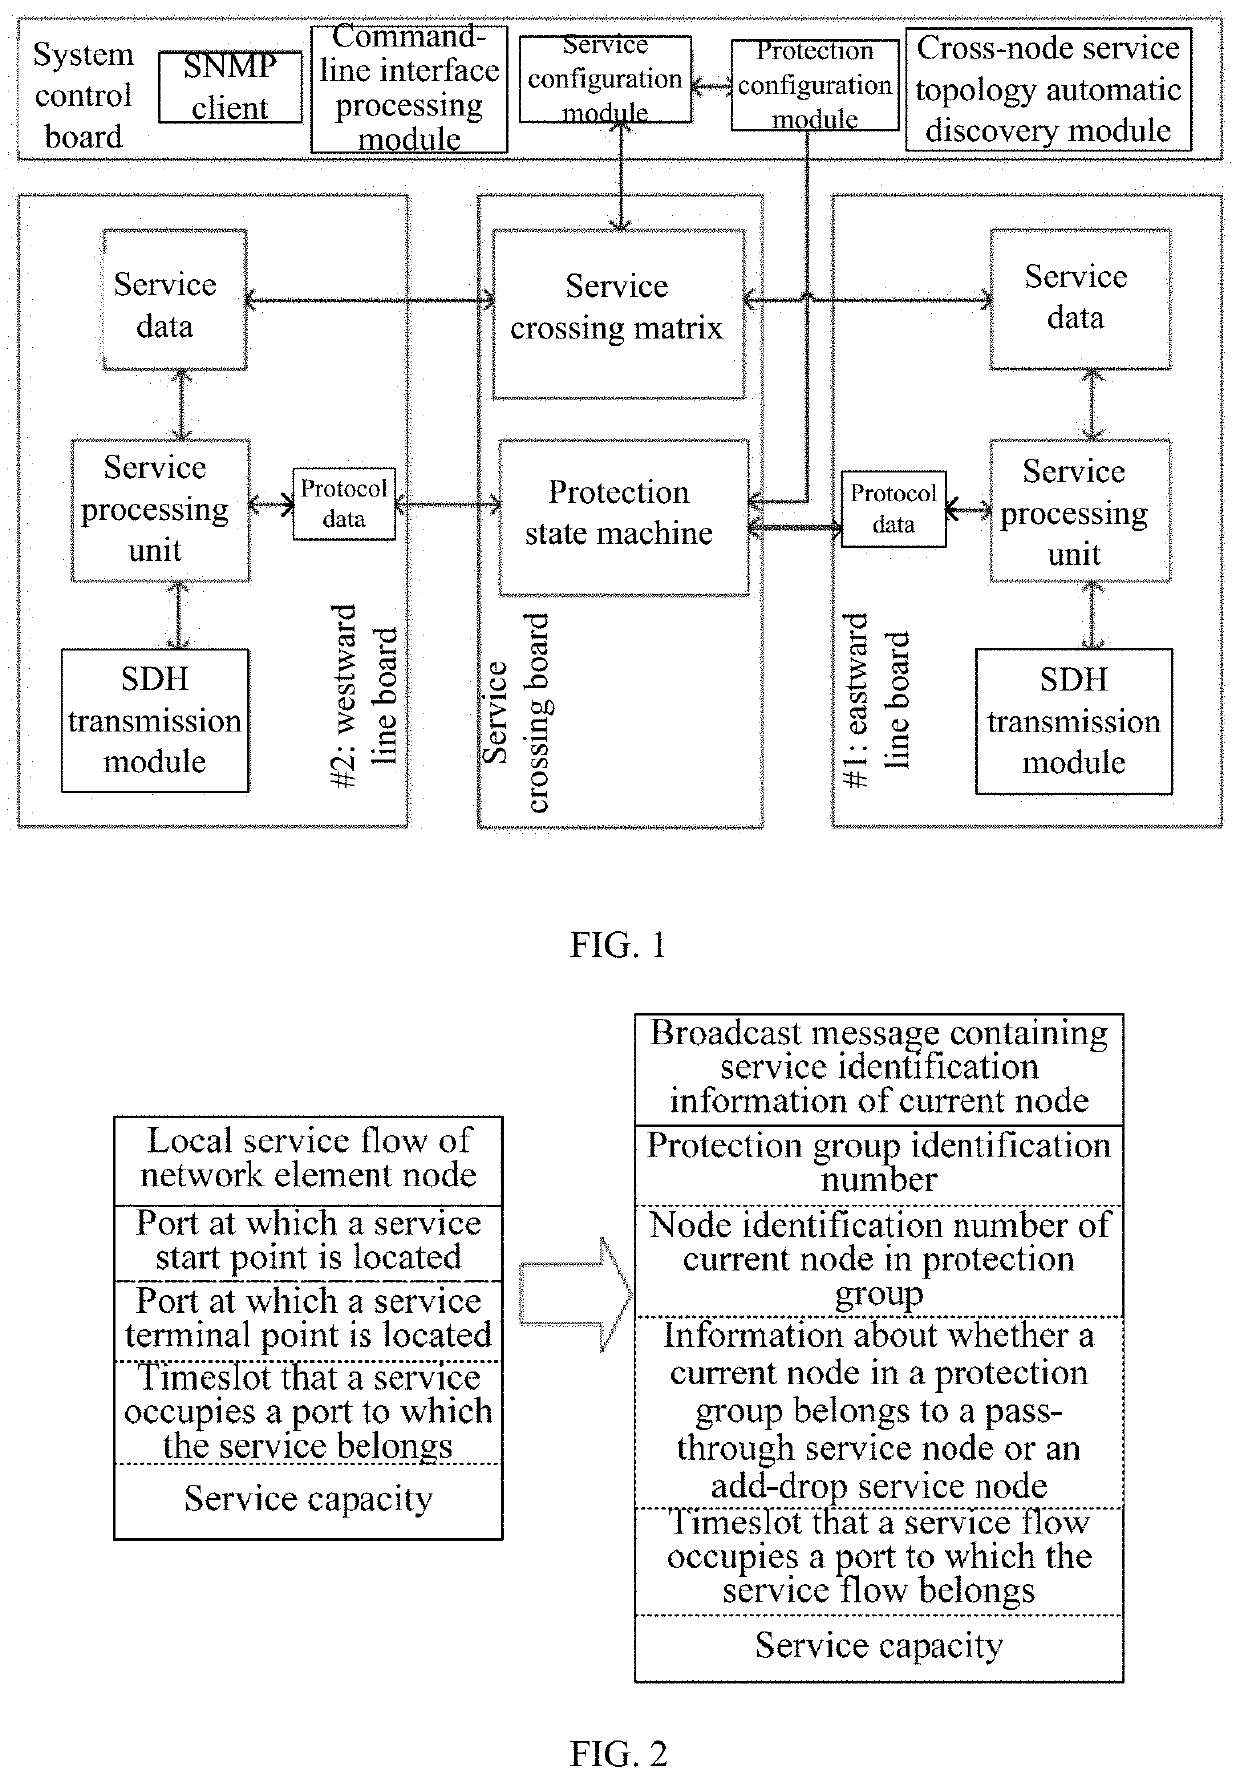 Method and device for automatically discovering cross-node service topology on transoceanic multiple section shared protection ring